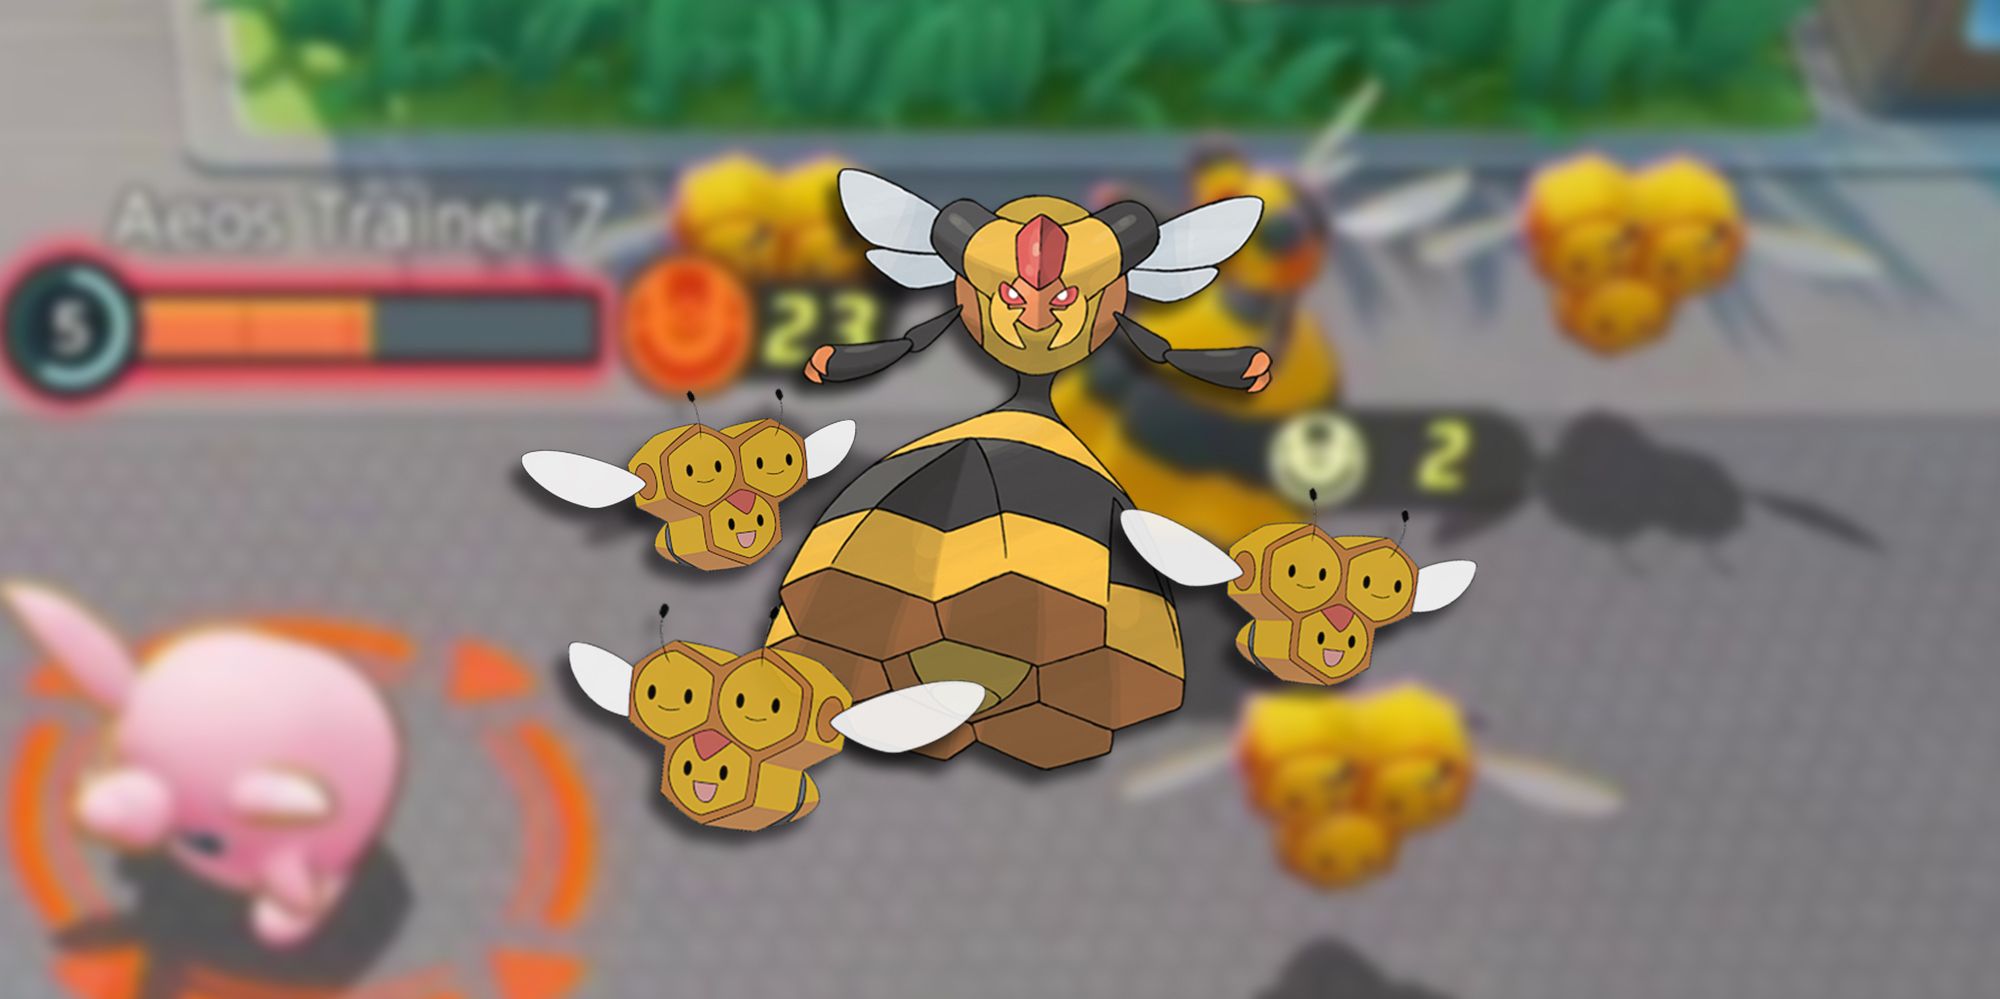 Pokemon Unite - Combee And Vespiqueen In-Game With PNGs Of The Pokemon Overlaid On Top